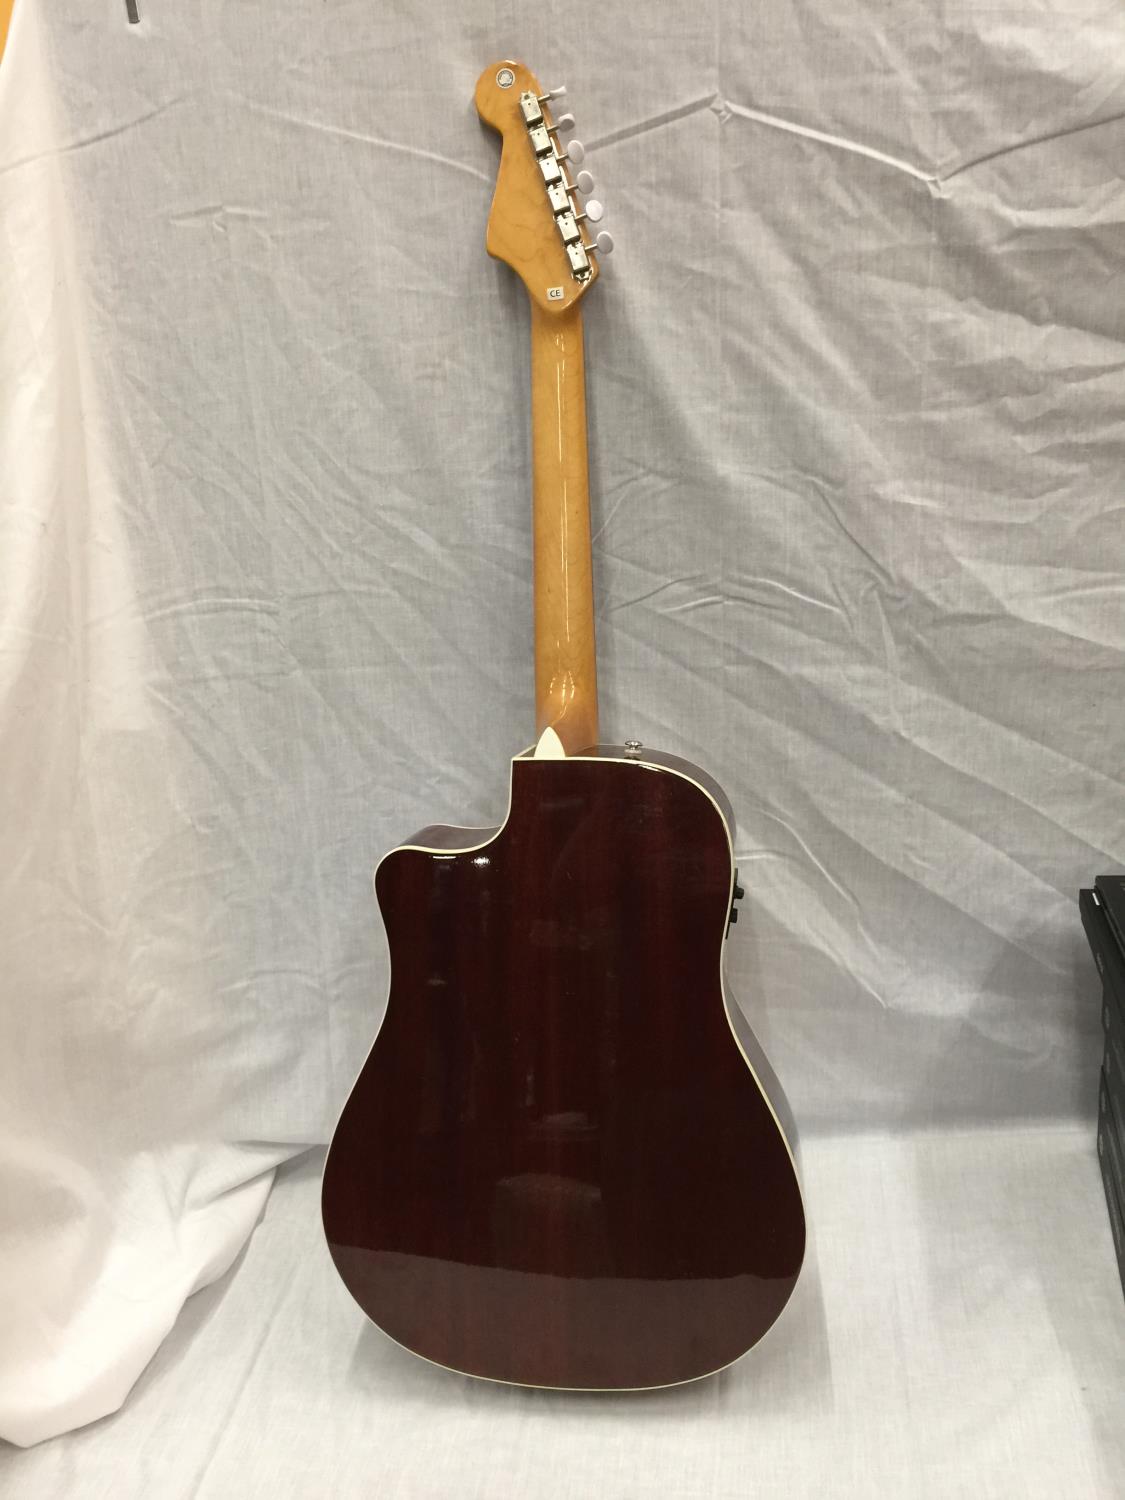 A FENDER REDONDO ELECTRIC ACOUSTIC CALIFORNIA SERIES GUITAR - Image 10 of 13